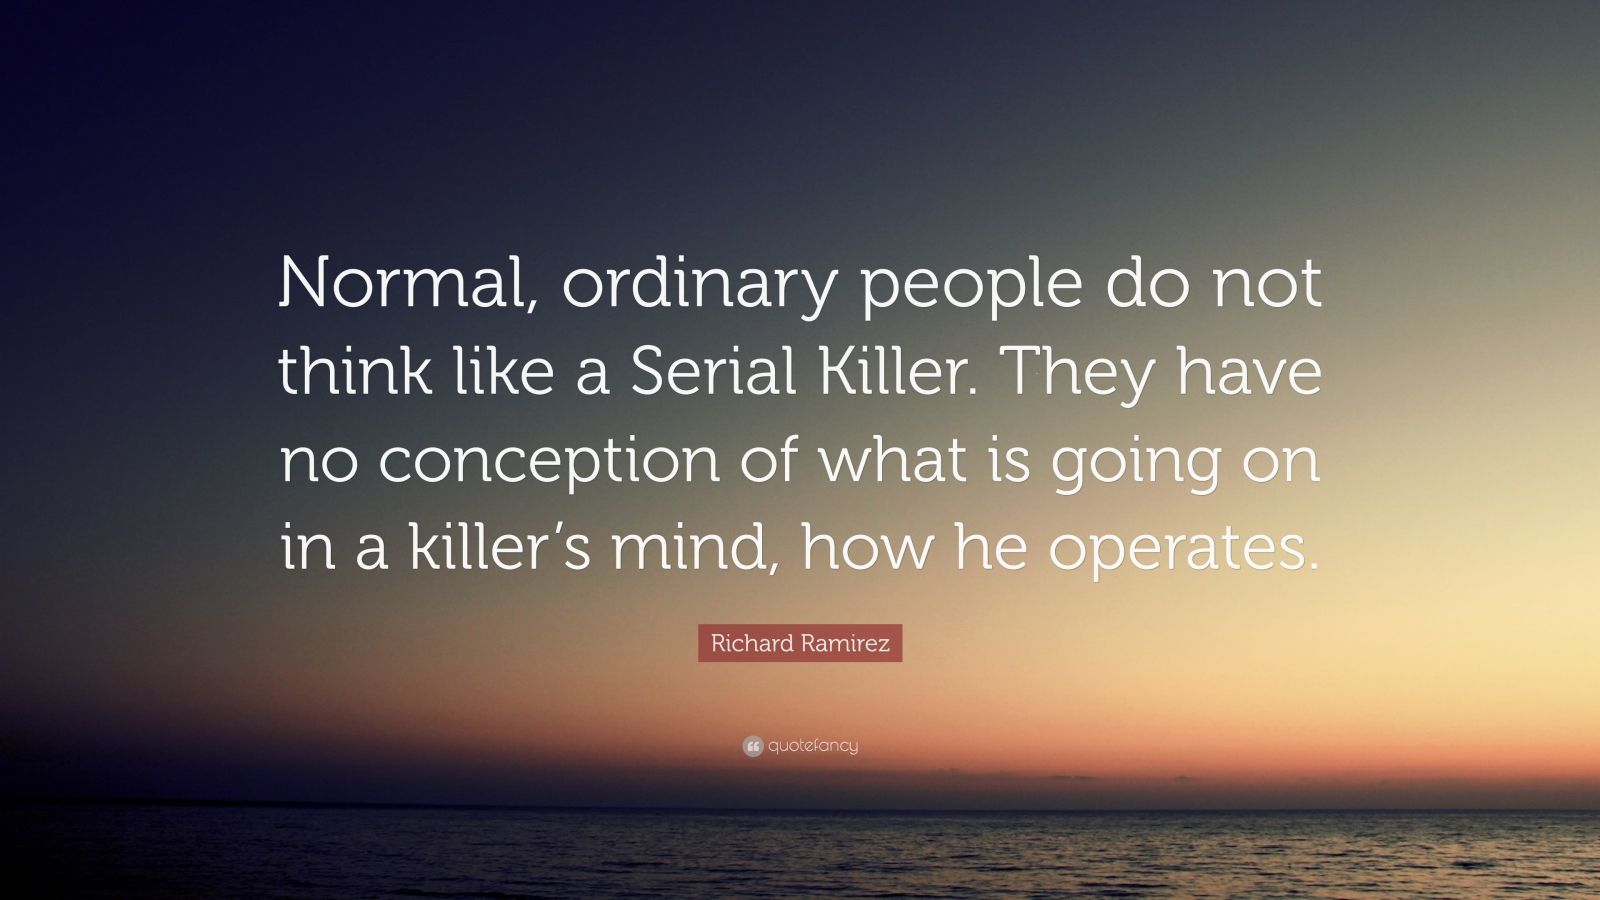 question to see if you think like a serial killer